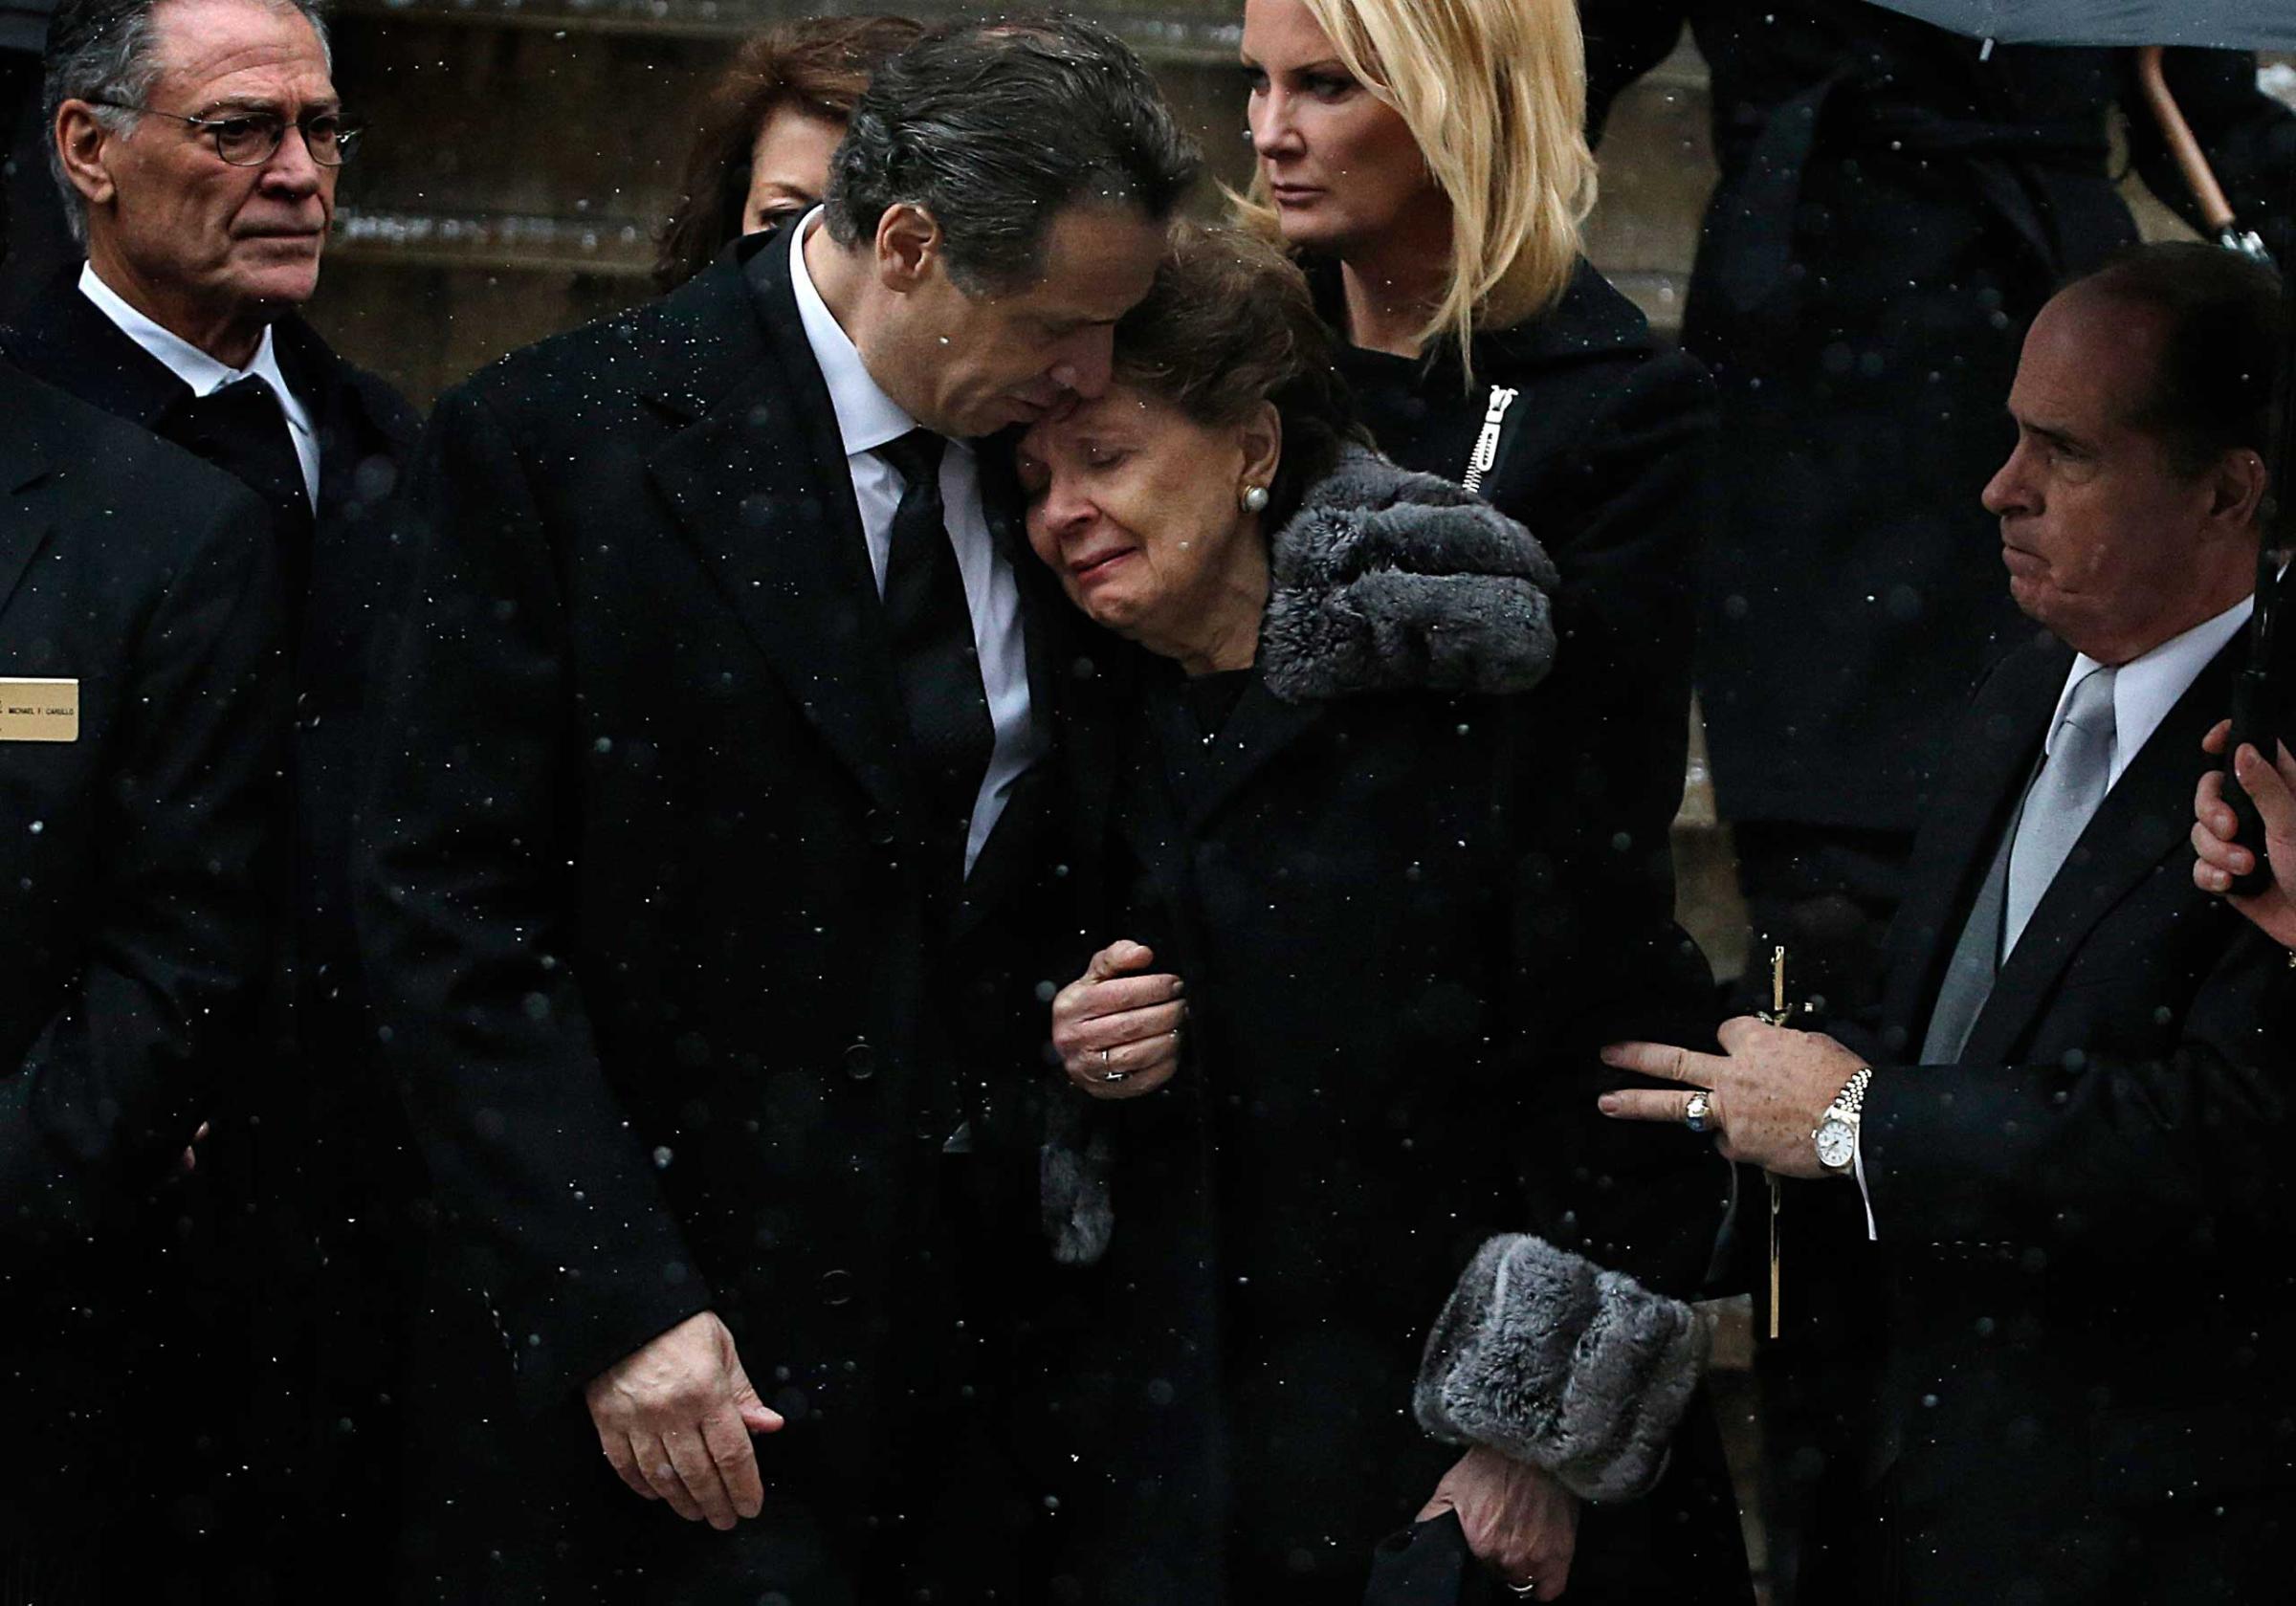 Jan. 6, 2015. New York Governor Andrew Cuomo comforts his mother Matilda outside the St. Ignatius Loyola Church after a funeral service for his late father, former Governor Mario Cuomo, in New York.